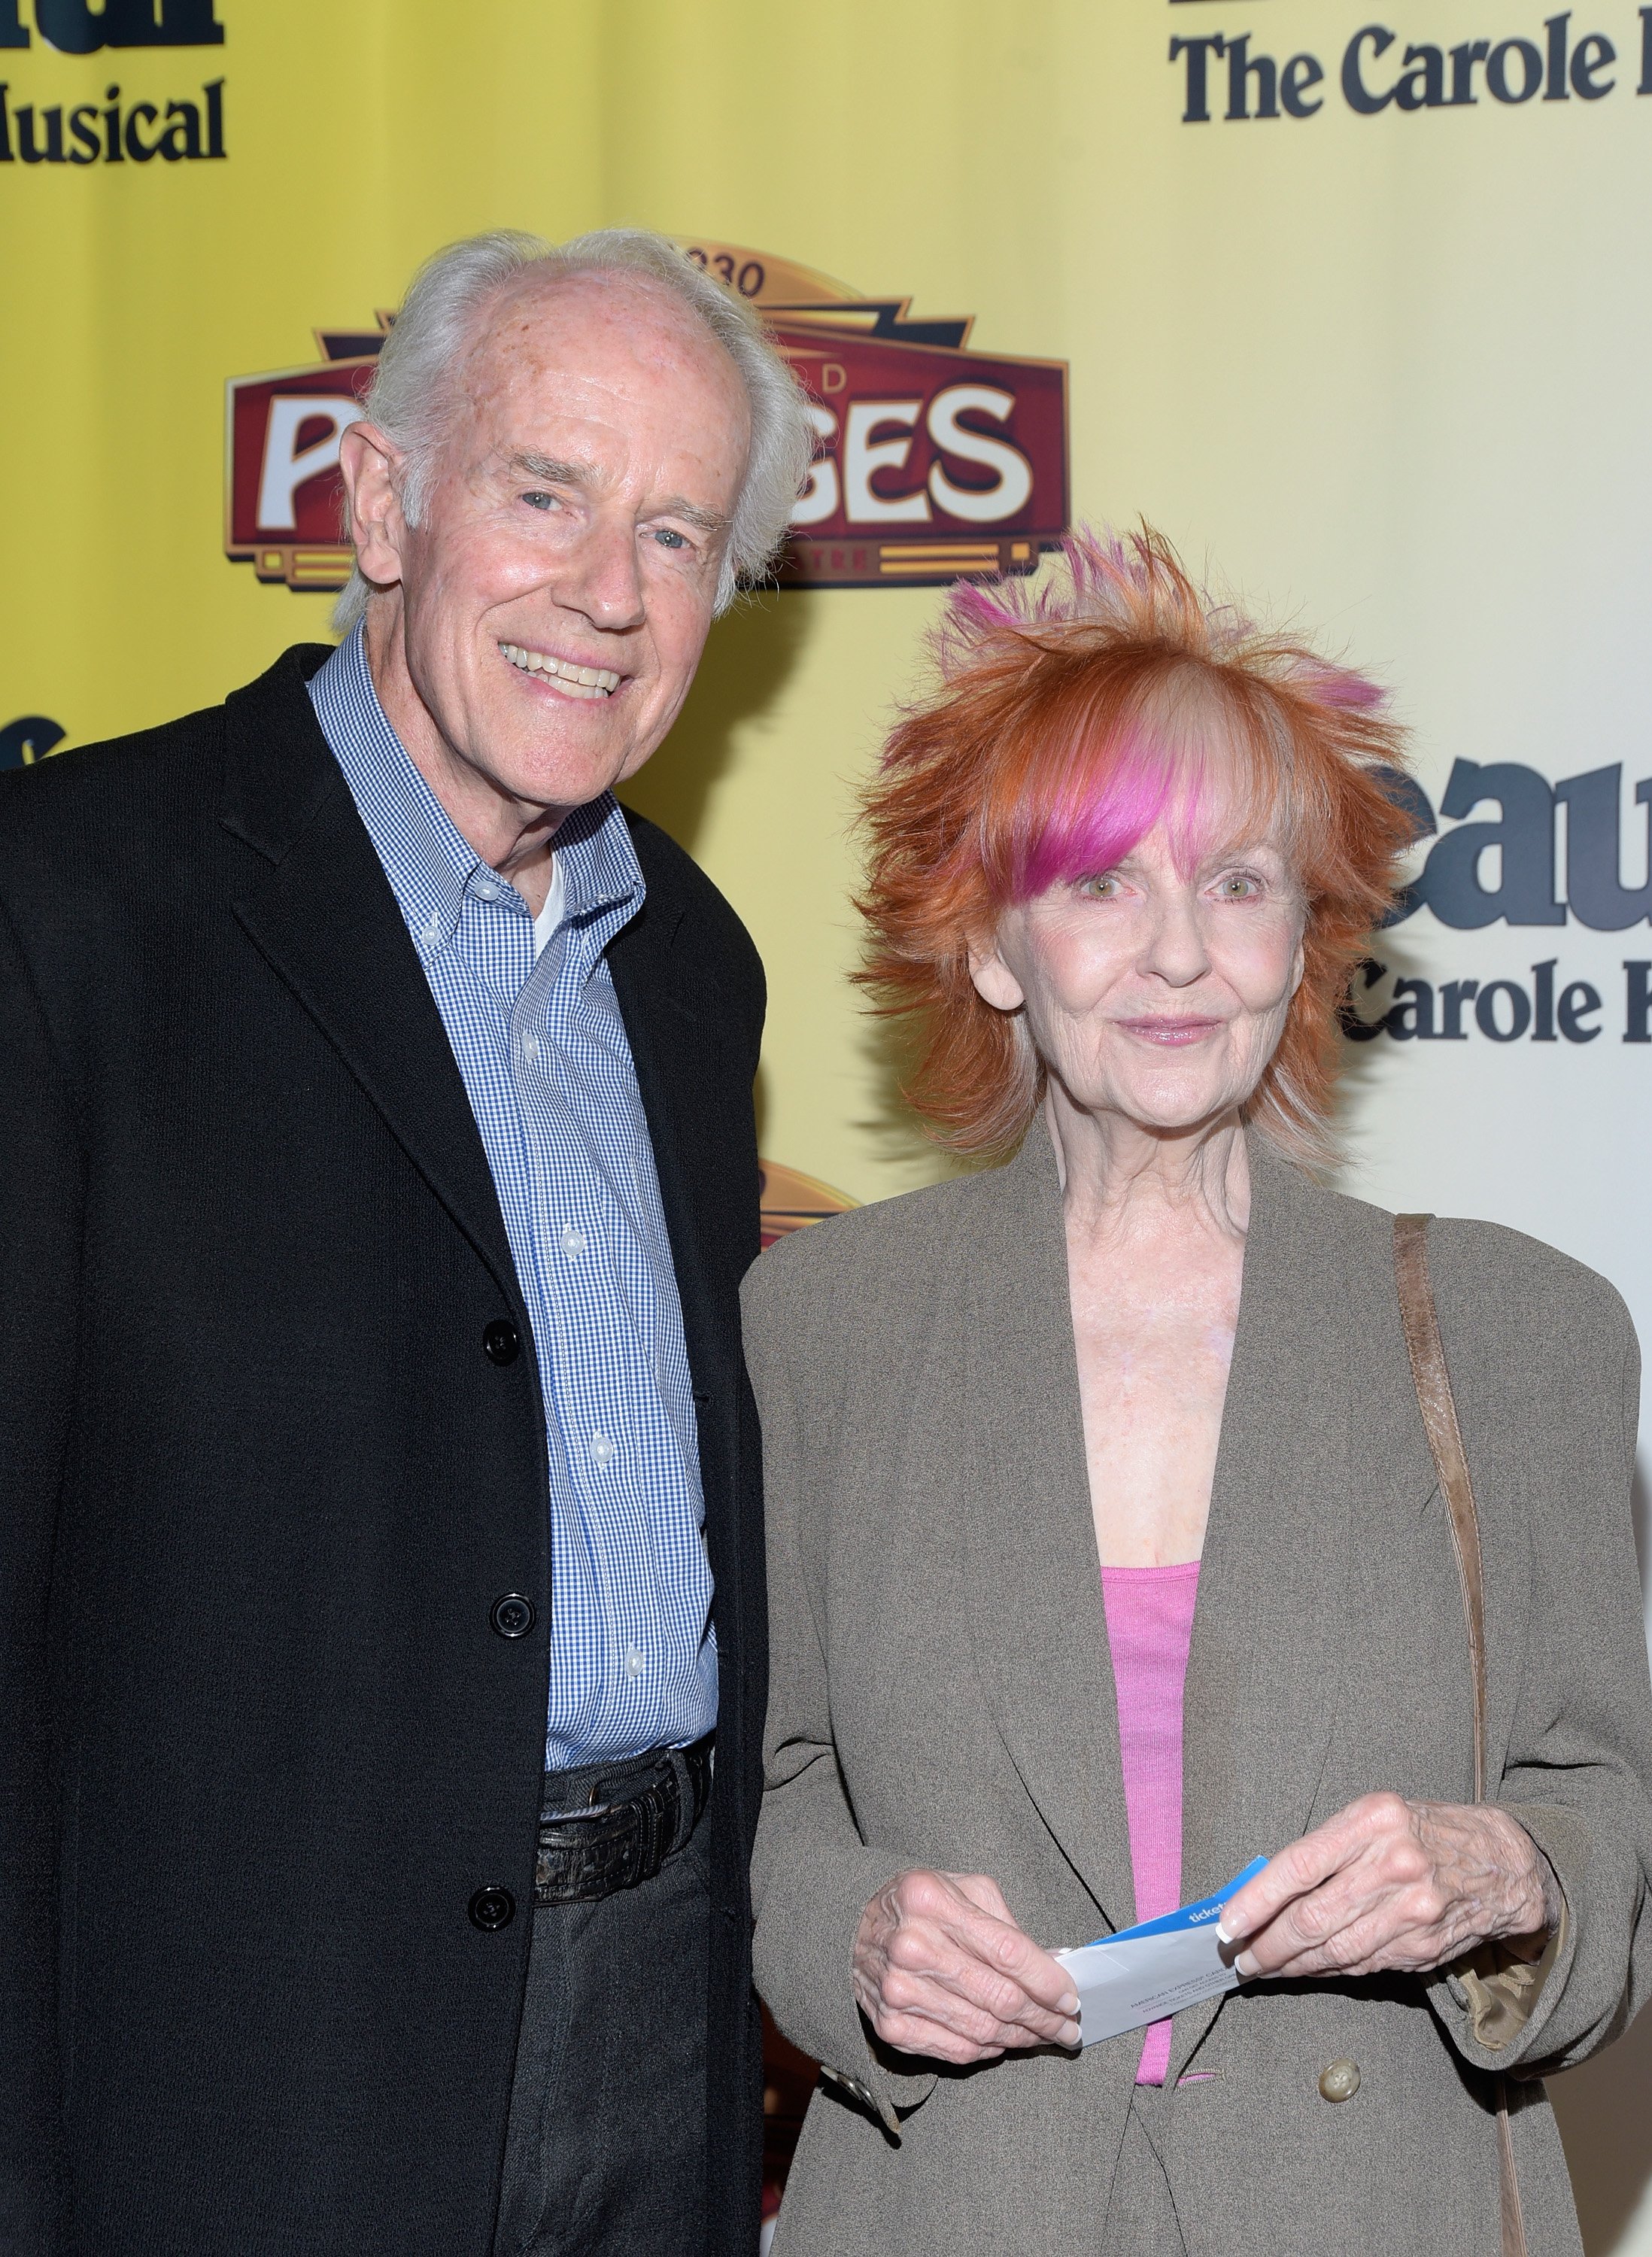 Mike Farrell and Shelley Fabares attend the Los Angeles engagement of "Beautiful - The Carole King Music" at the Pantages Theatre on September 13, 2018 in Hollywood, California ┃Source: Getty Images